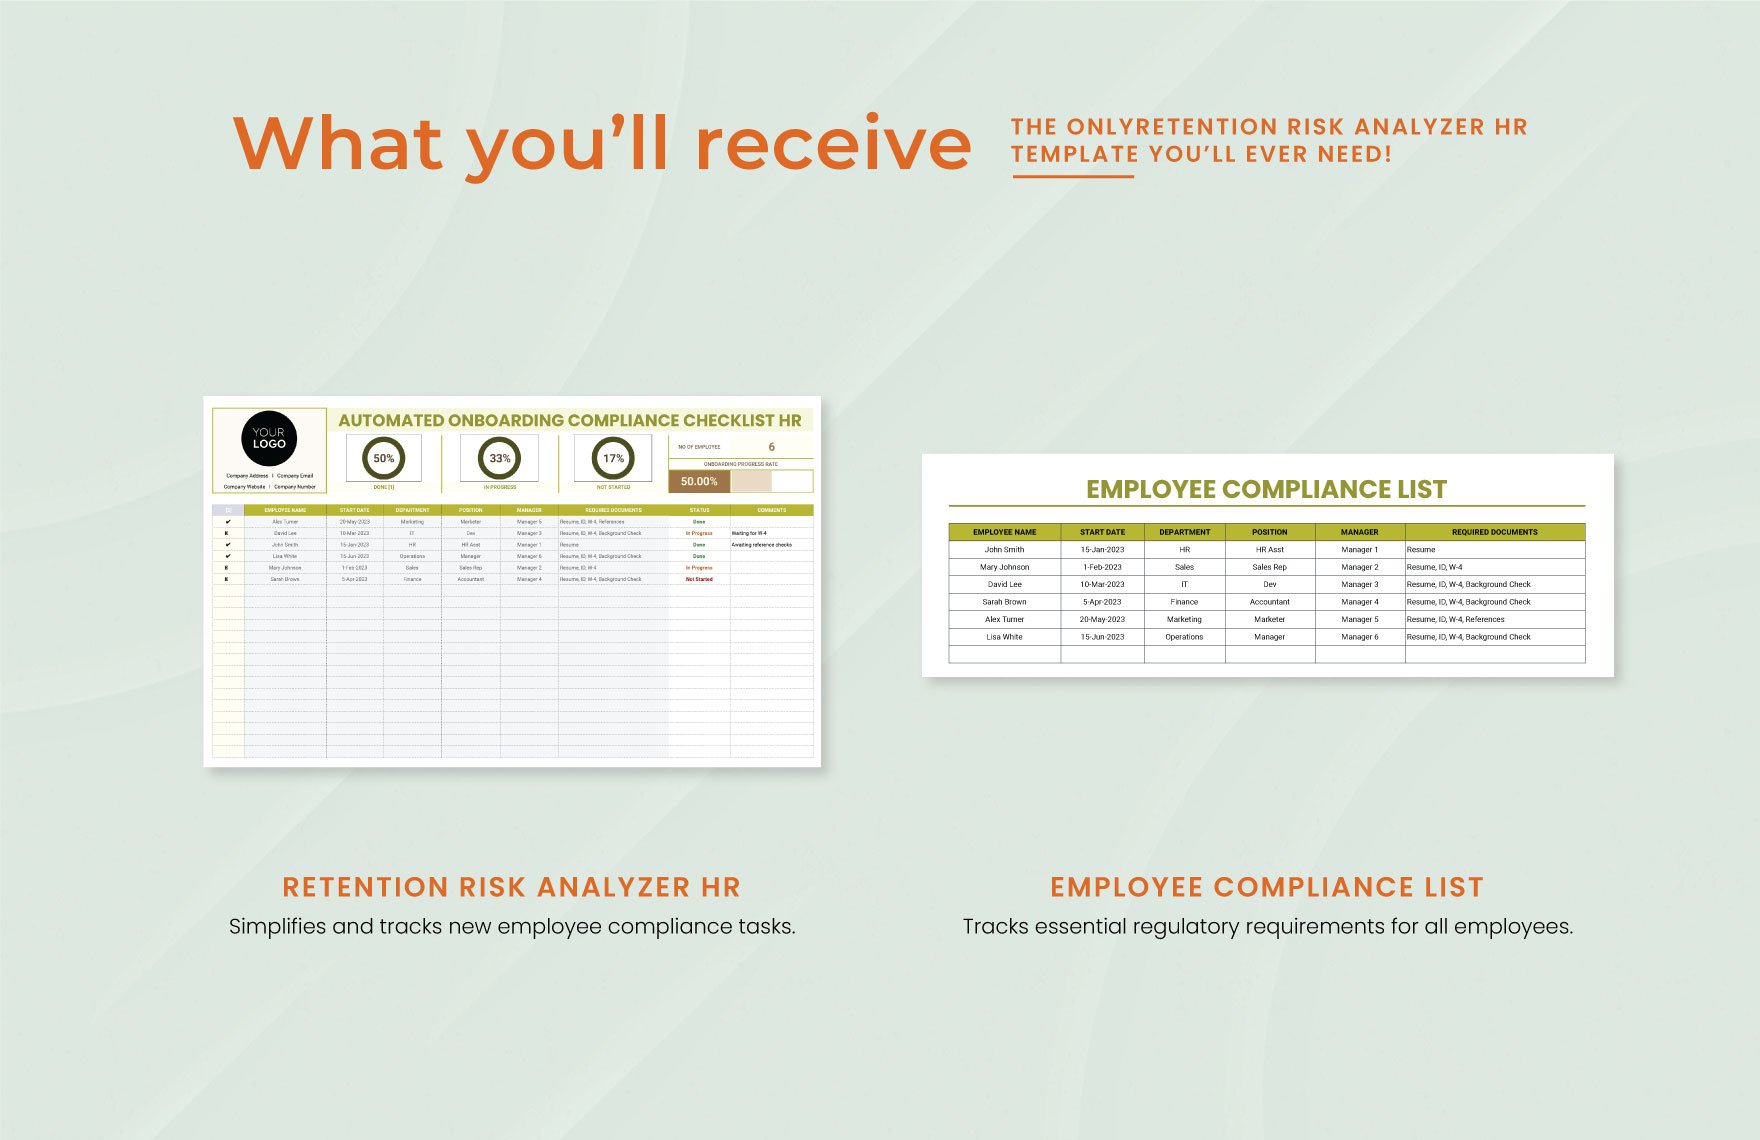 Automated Onboarding Compliance Checklist HR Template